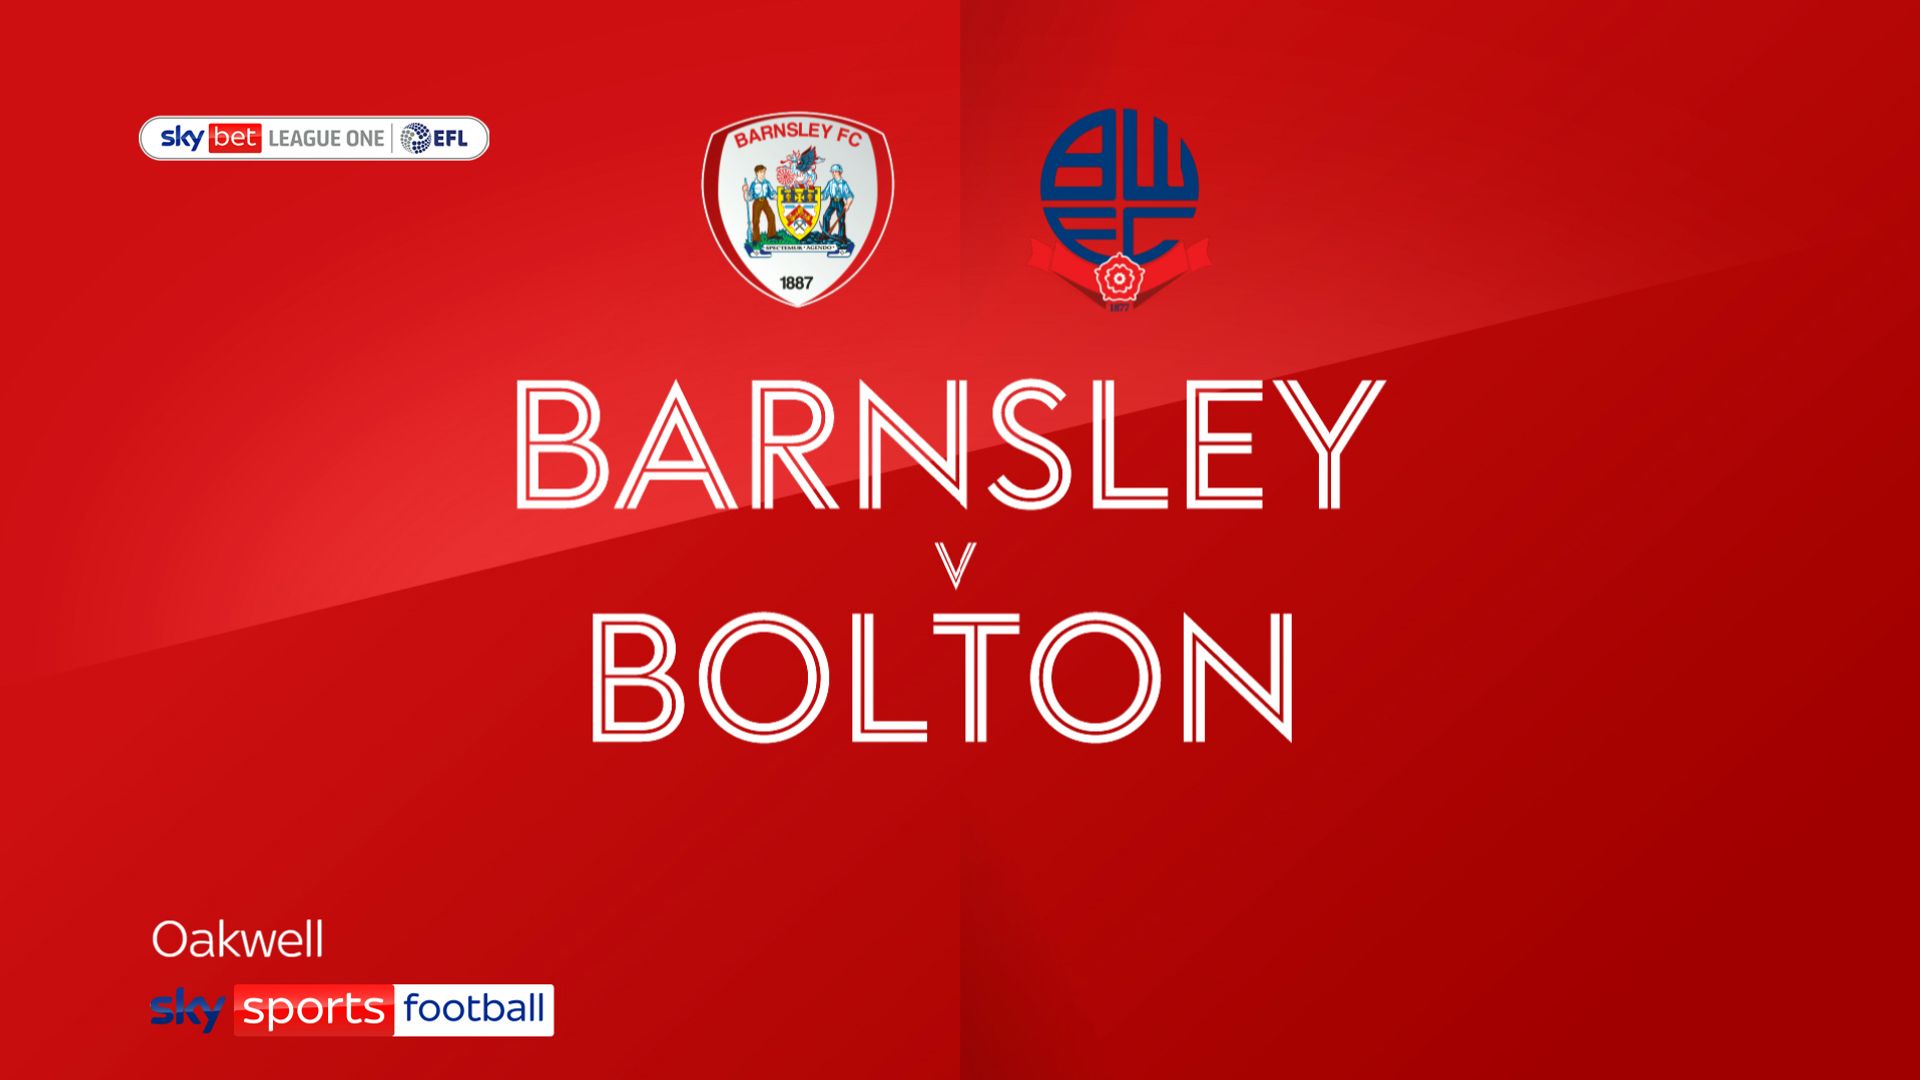 Bolton make most of early red card to defeat play-off rivals Barnsley